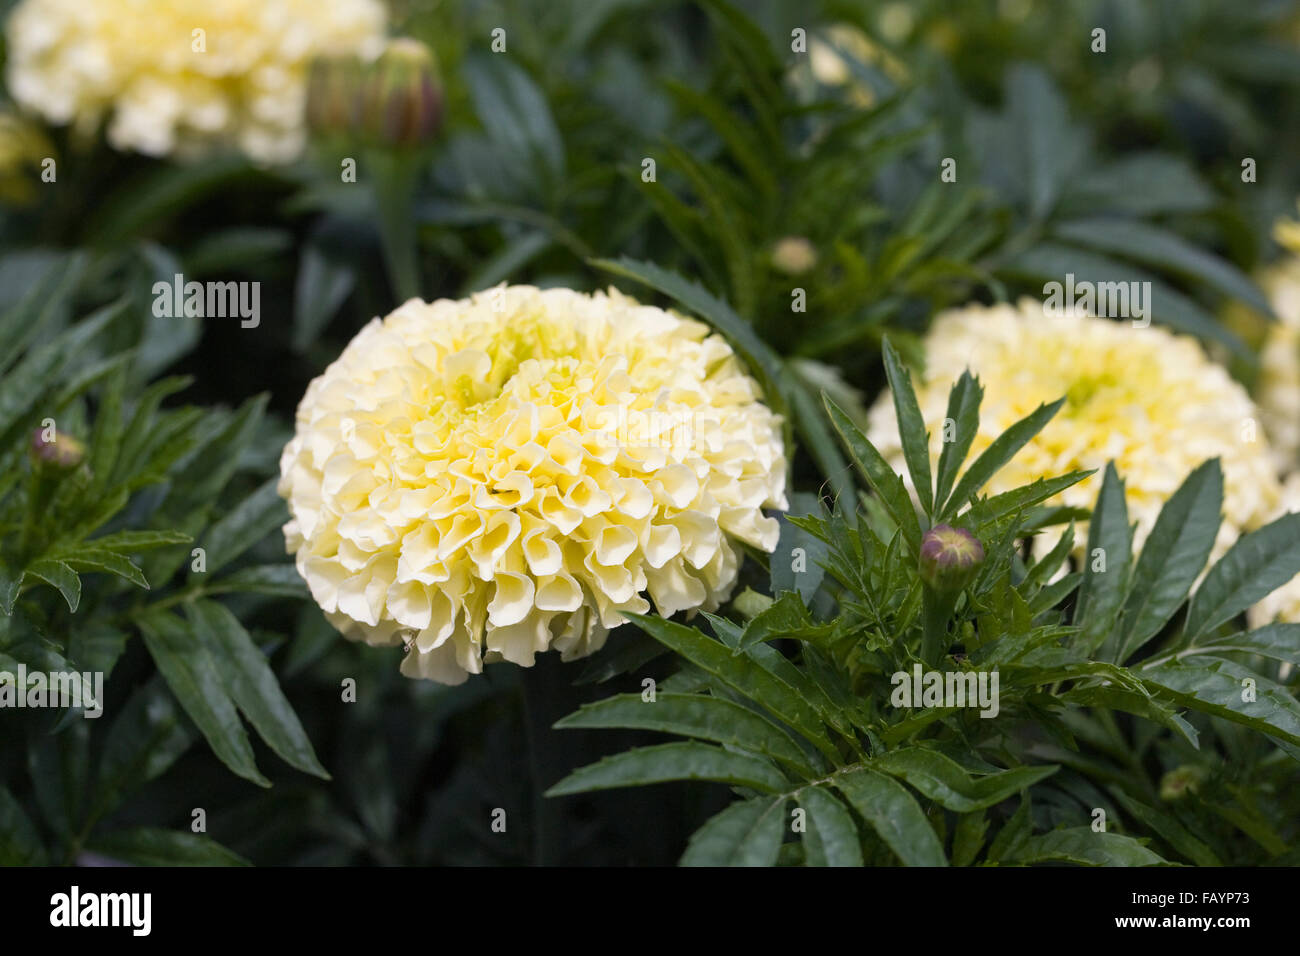 Tagetes erecta. African marigold growing in the garden. Stock Photo